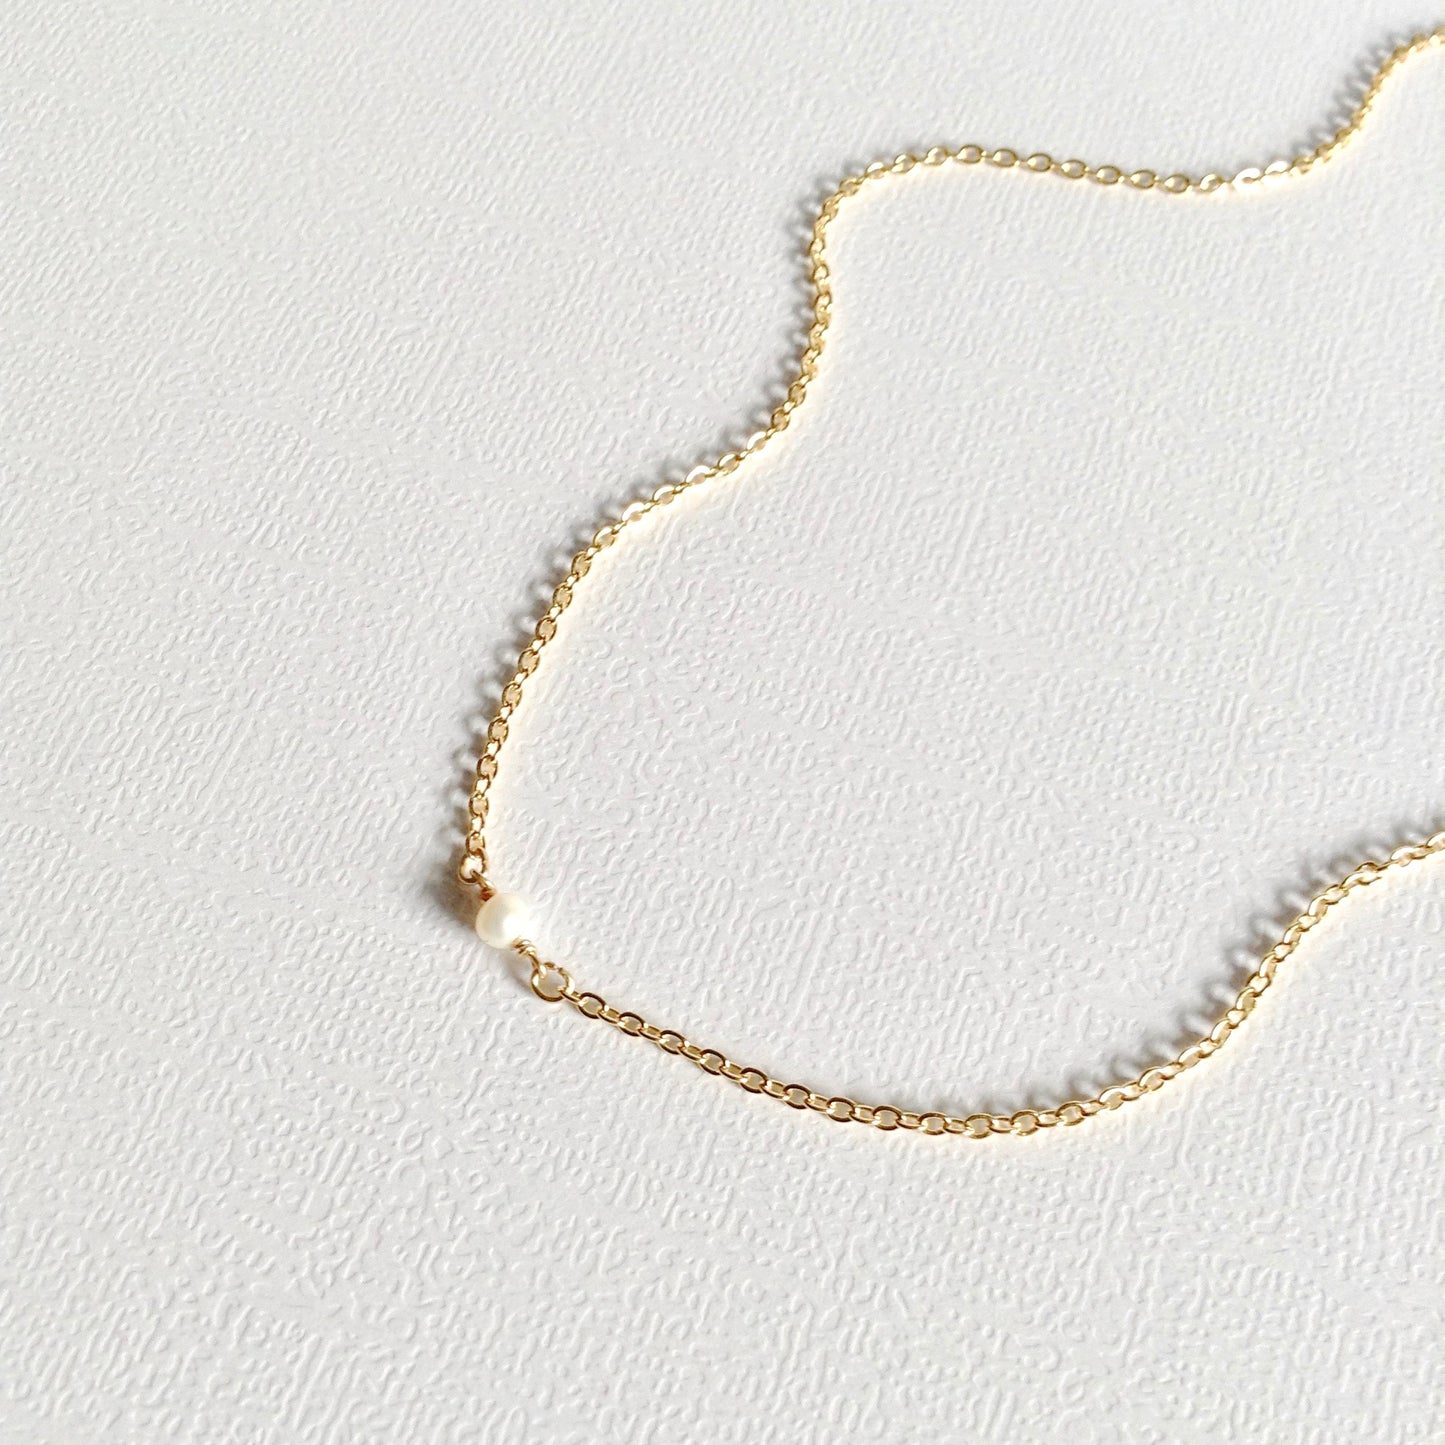 Aunt Gift Tiny Single Pearl Necklace | Meaningful Necklace | IB Jewelry